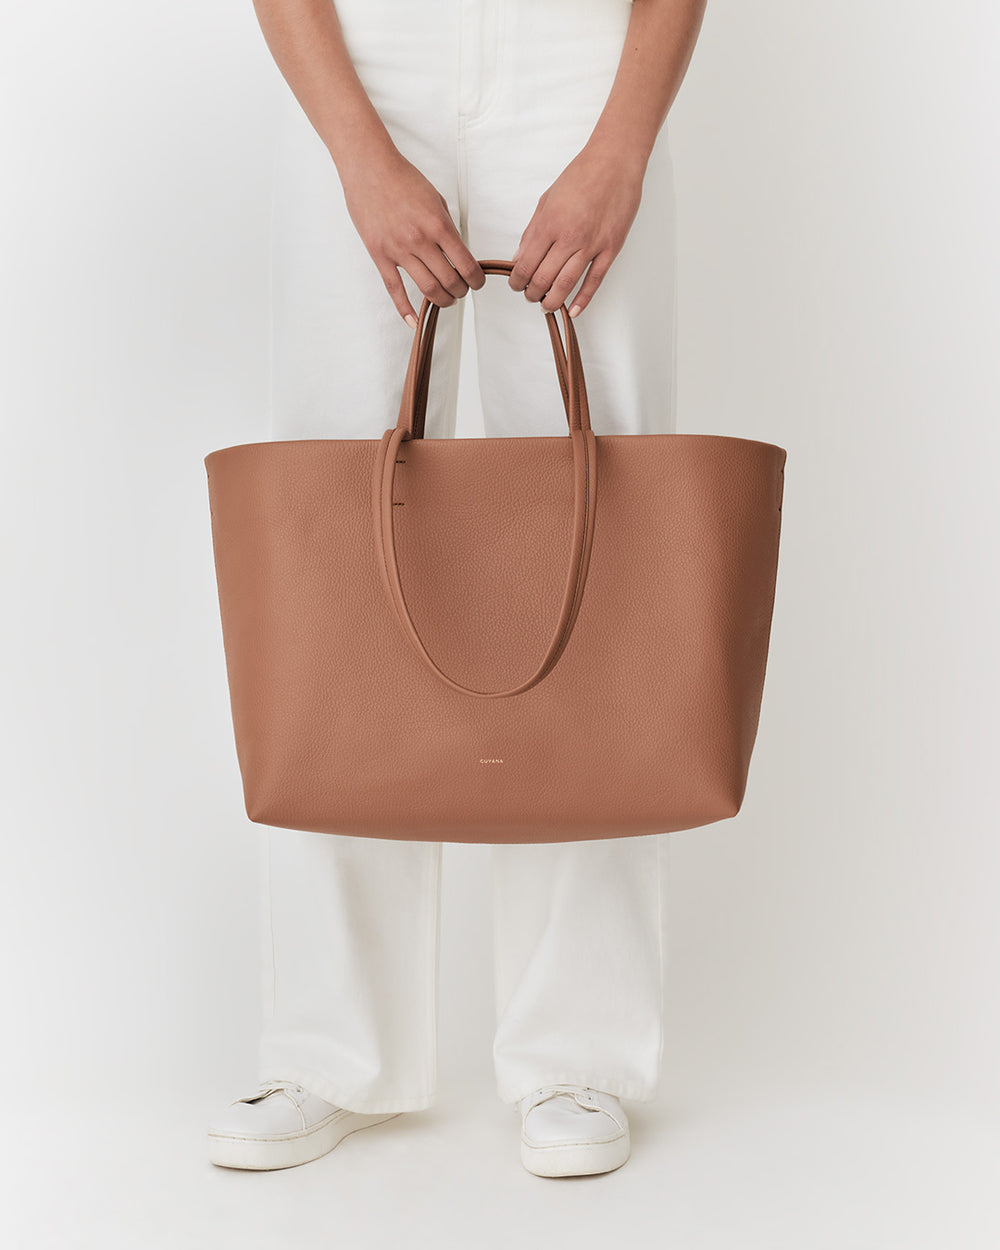 Person holding a large tote bag, standing in white pants and shoes.